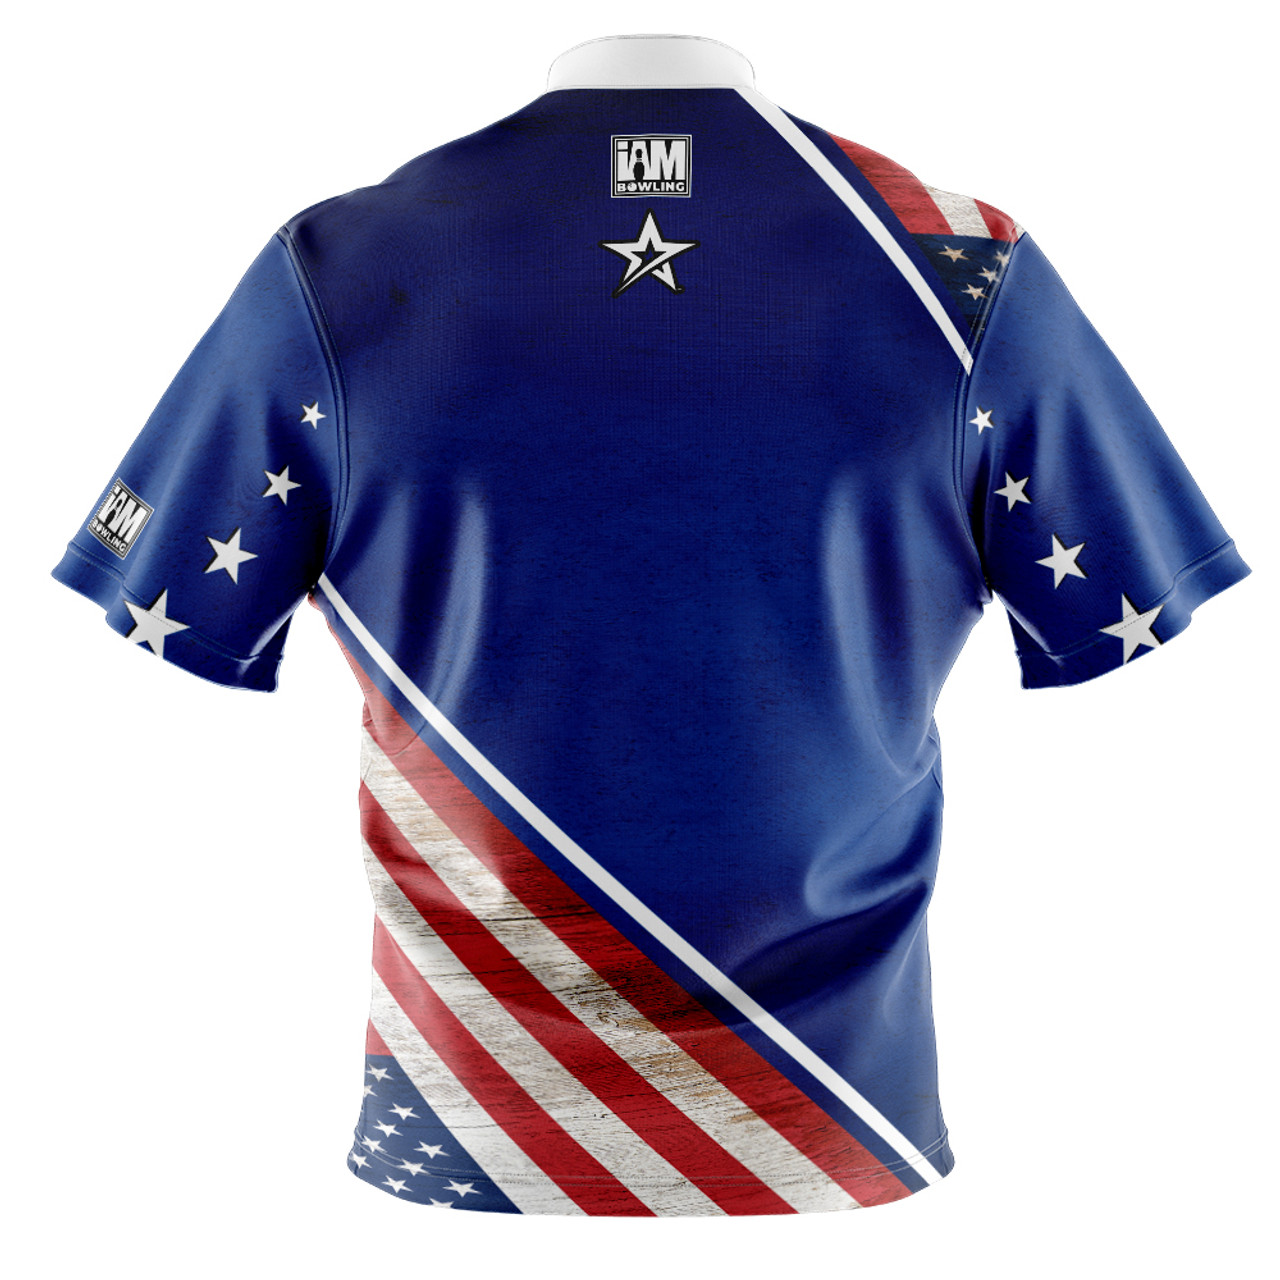 Roto Grip DS Bowling Jersey - Design 2029-RG